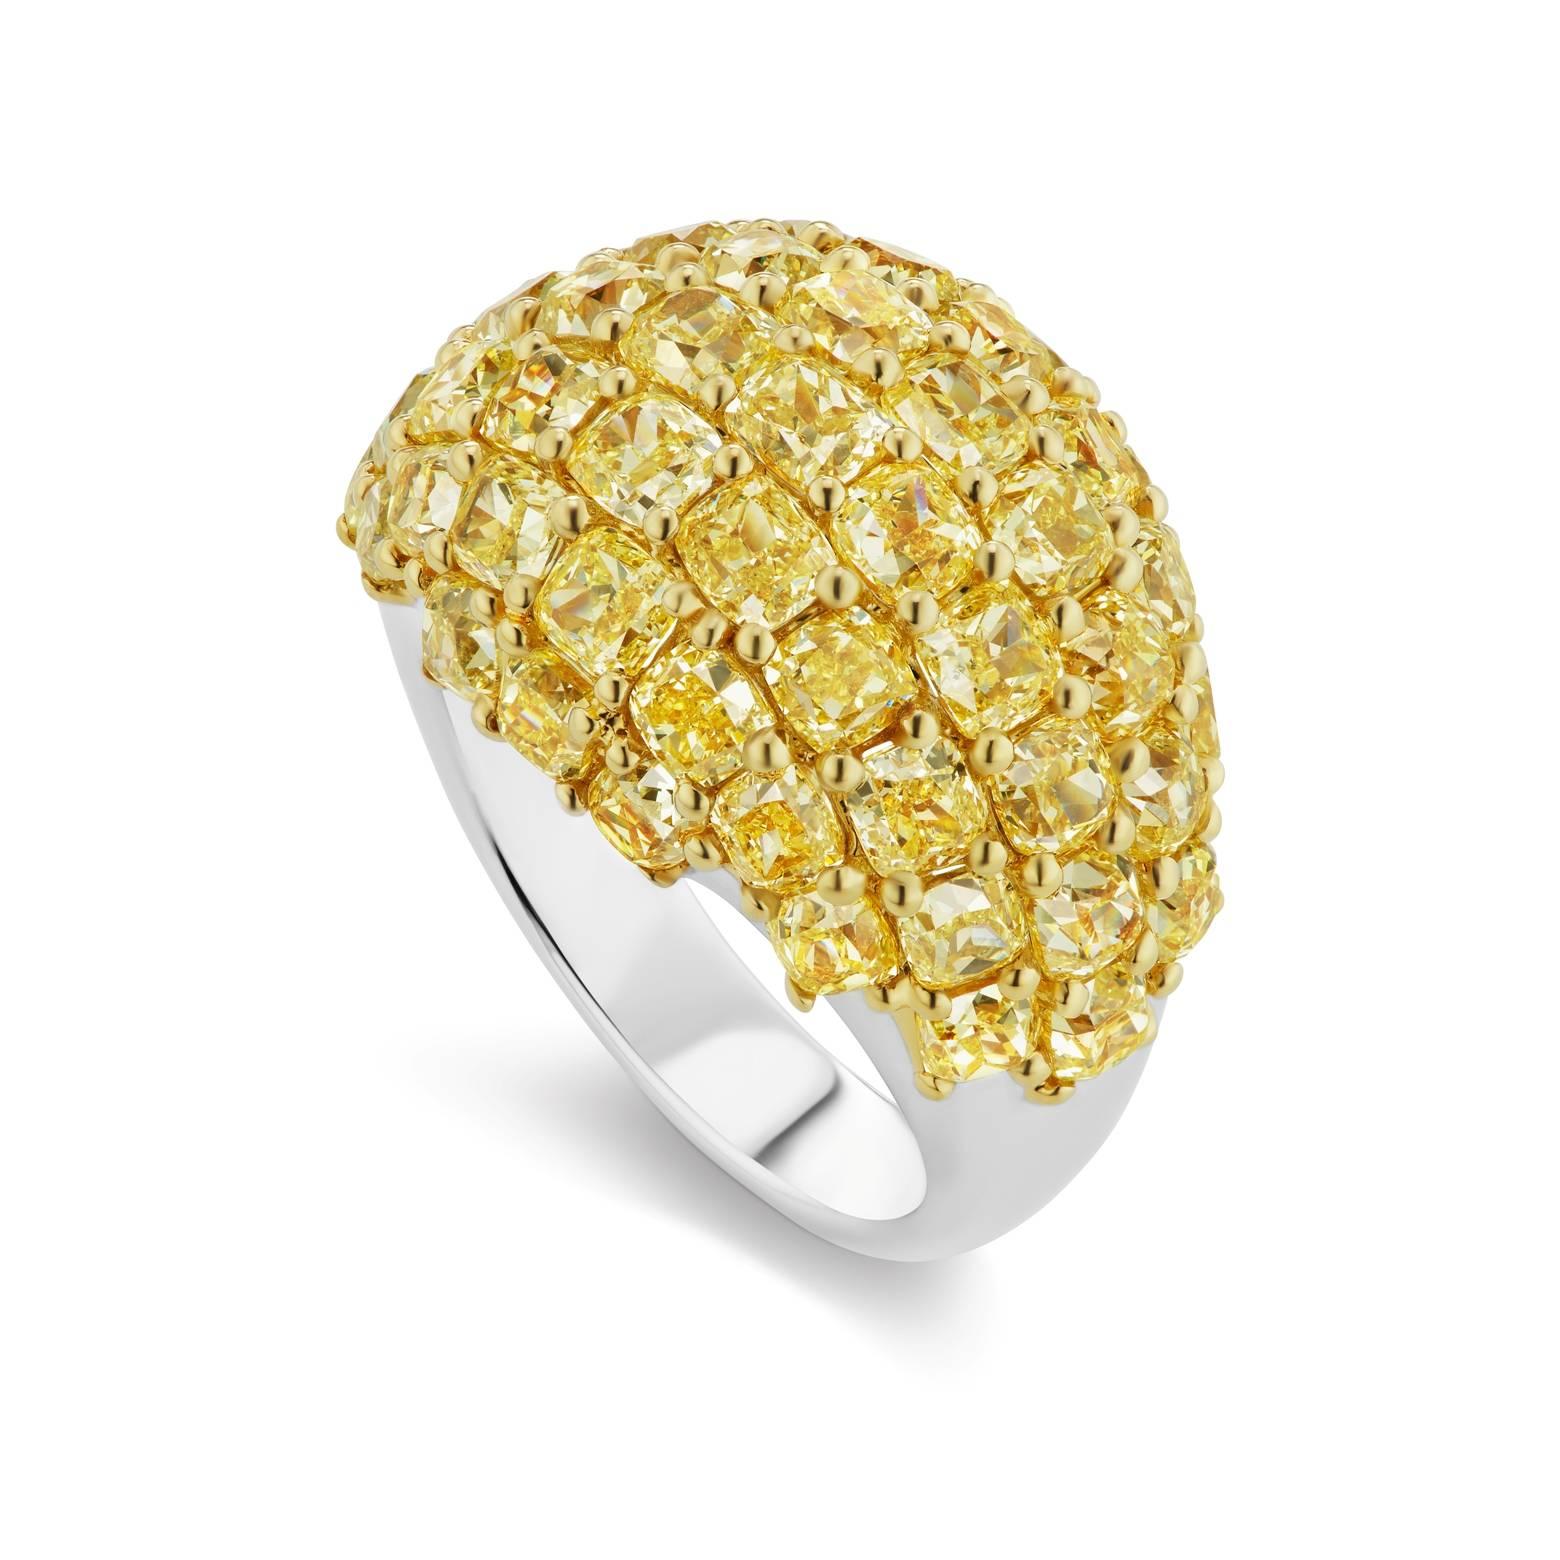 From Scarselli this extraordinary diamond dome ring is completed with 51 Fancy Yellow Cushion Cut, high clarity diamonds totaling 8.22 carats set in 18-carat Yellow and White Gold. This ring is extremely well made for durability and is very wearable